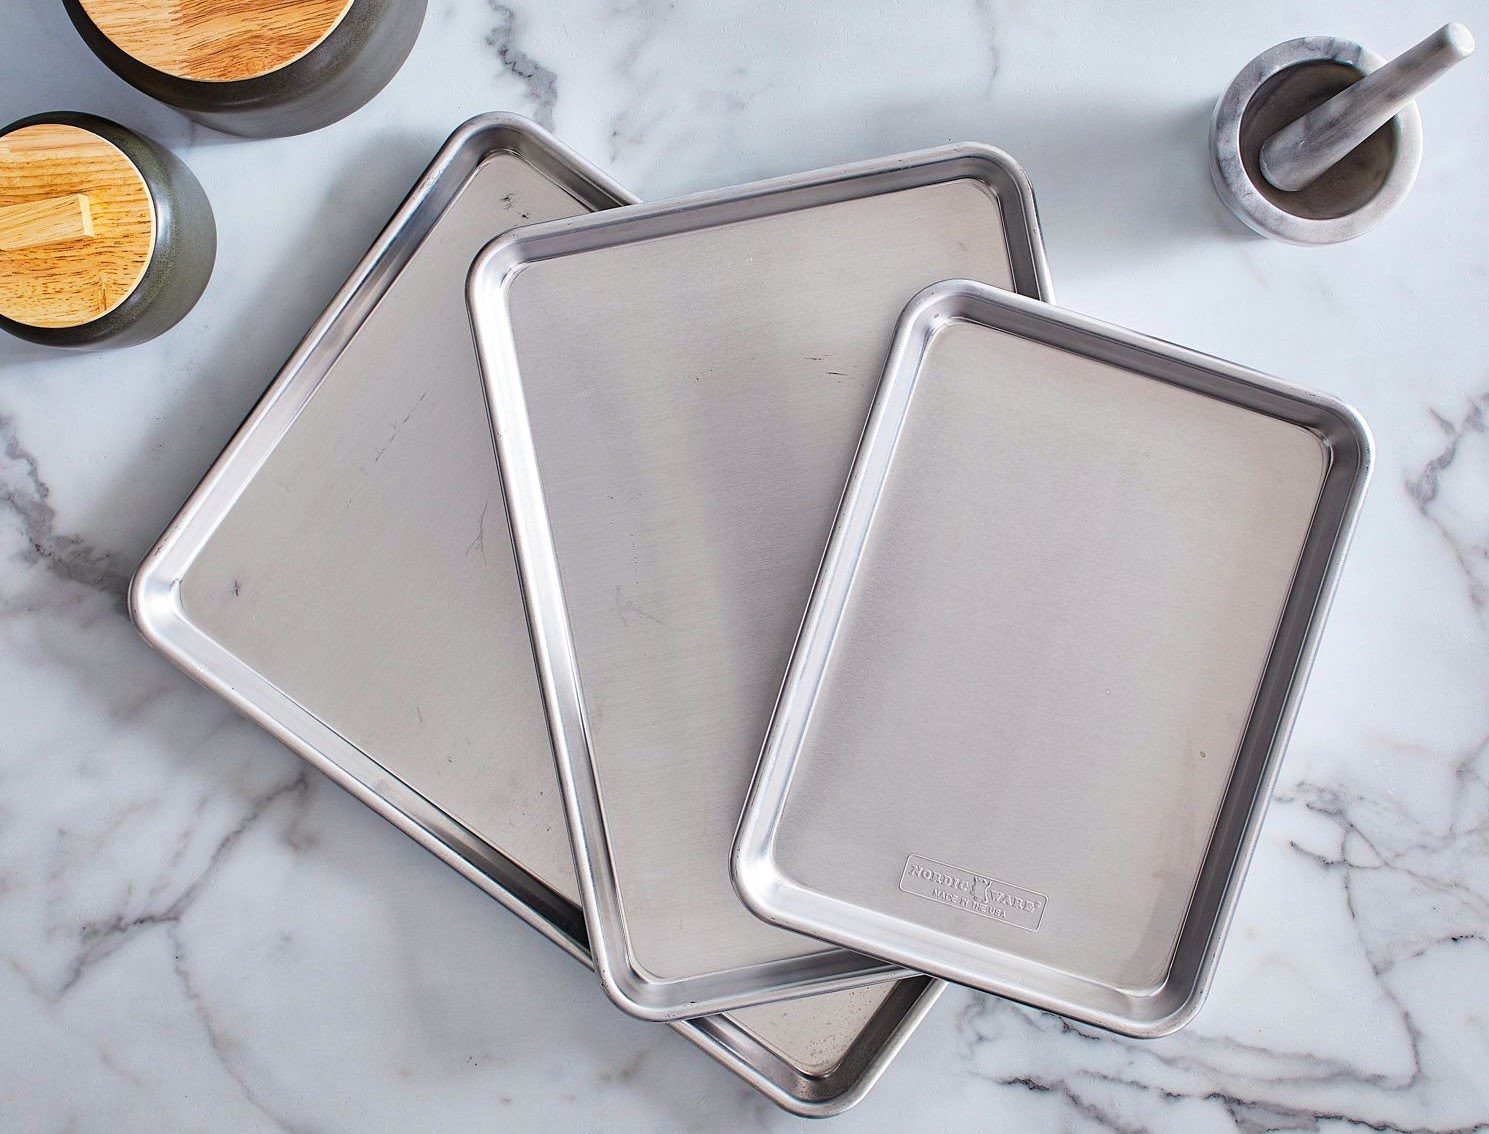 Baking Sheets Review: The Best Options for Your Kitchen